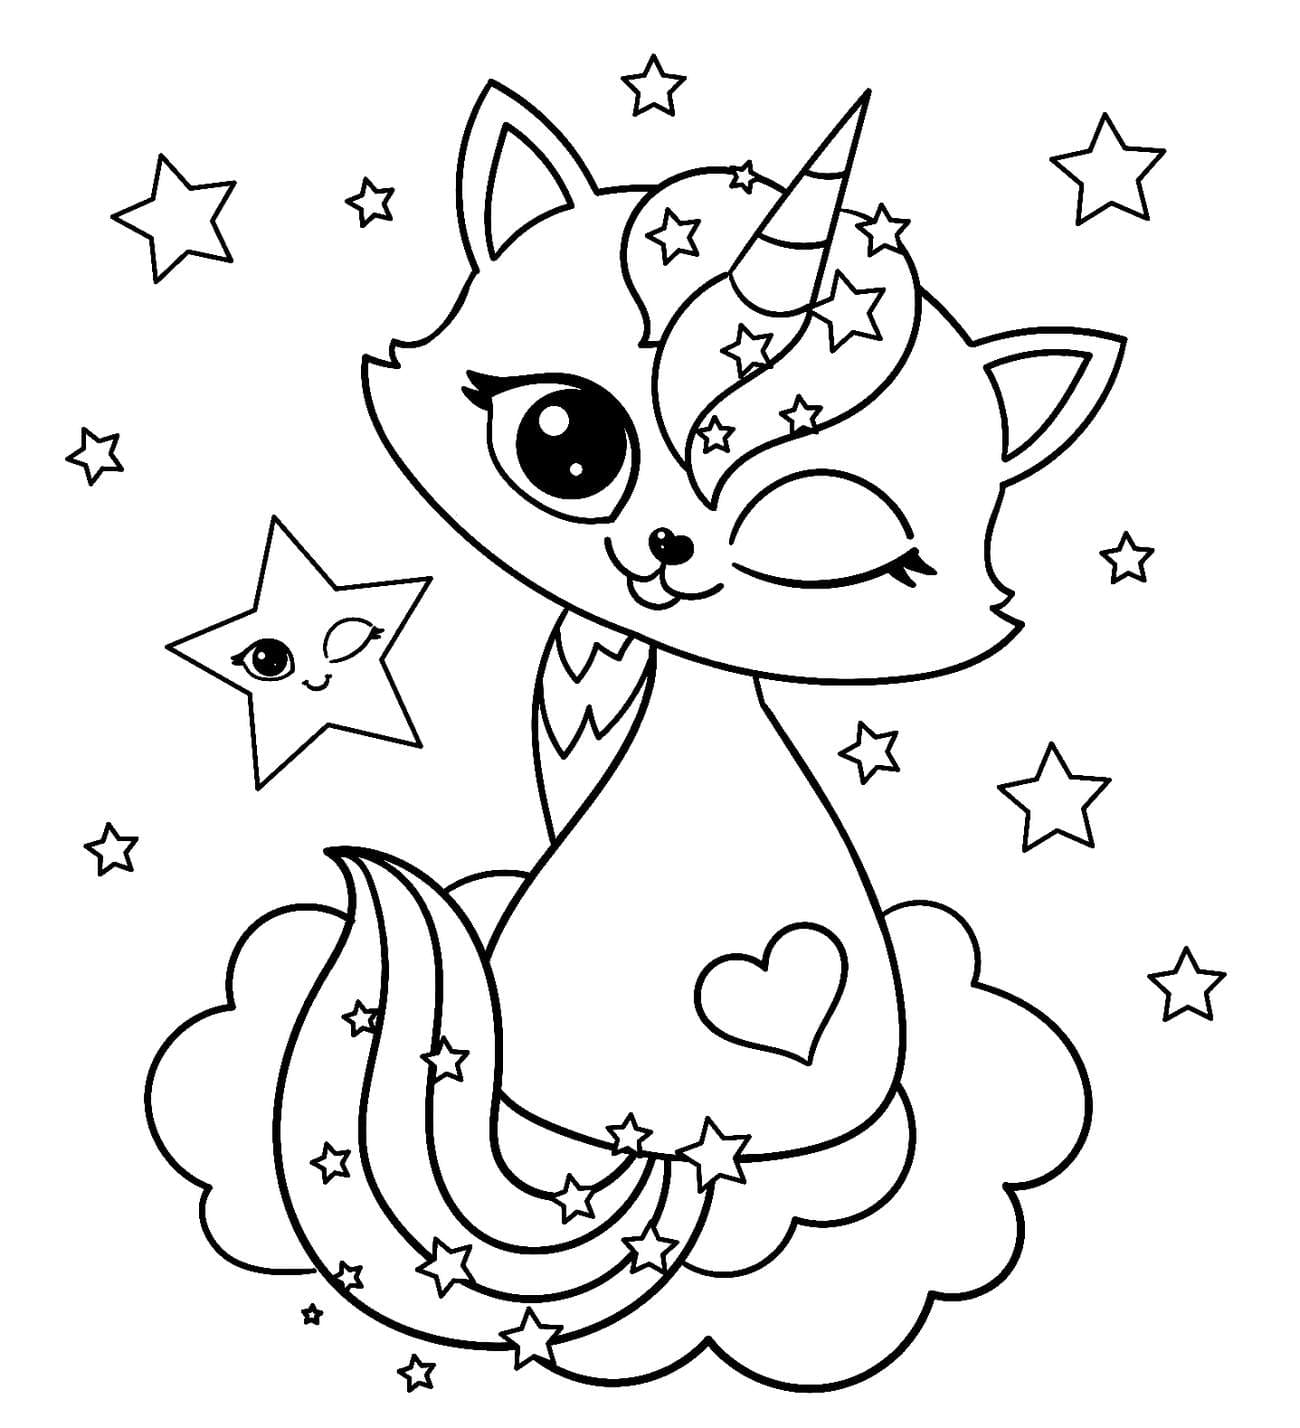 Coloring page Unicorn Cat among the stars